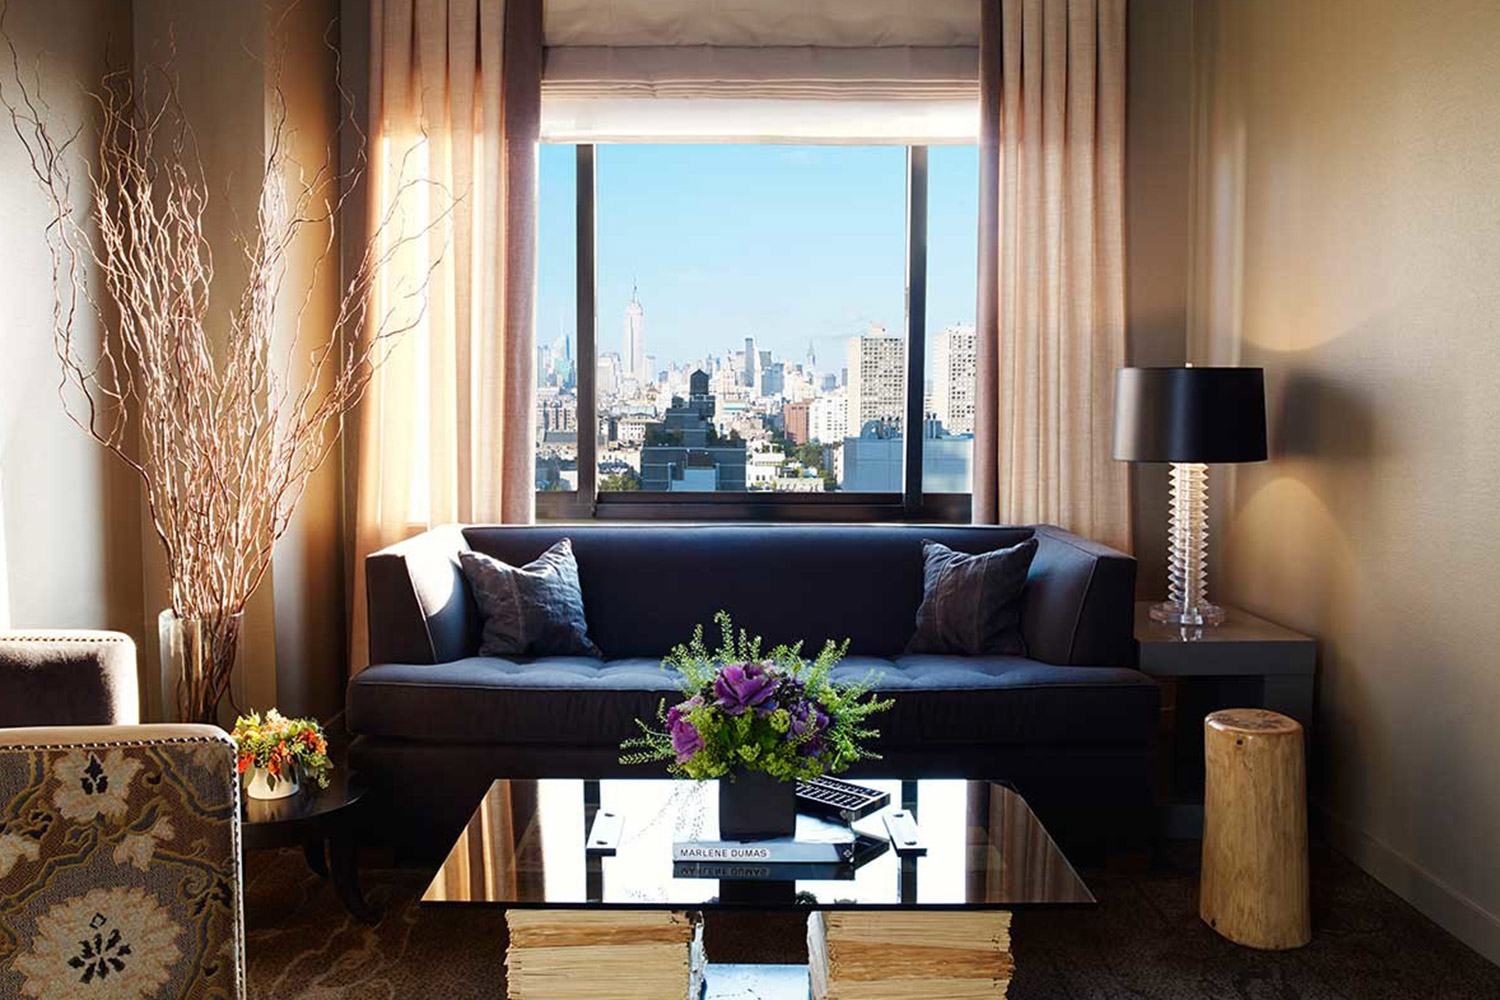 Deluxe One Bedroom Suite living rooo with a blue couch, coffee table with flowers and a plush chair. there is a view of the manhattan skyline